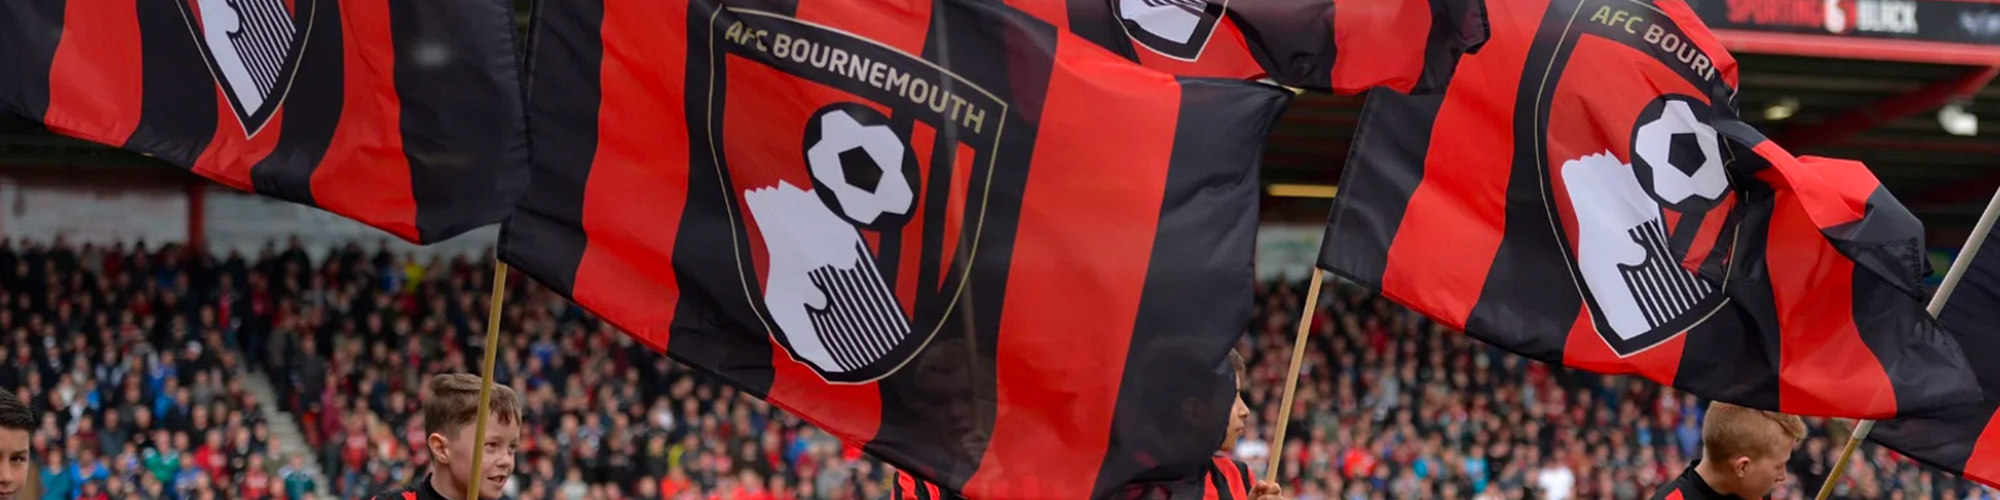 Bournemouth Tickets & Experiences